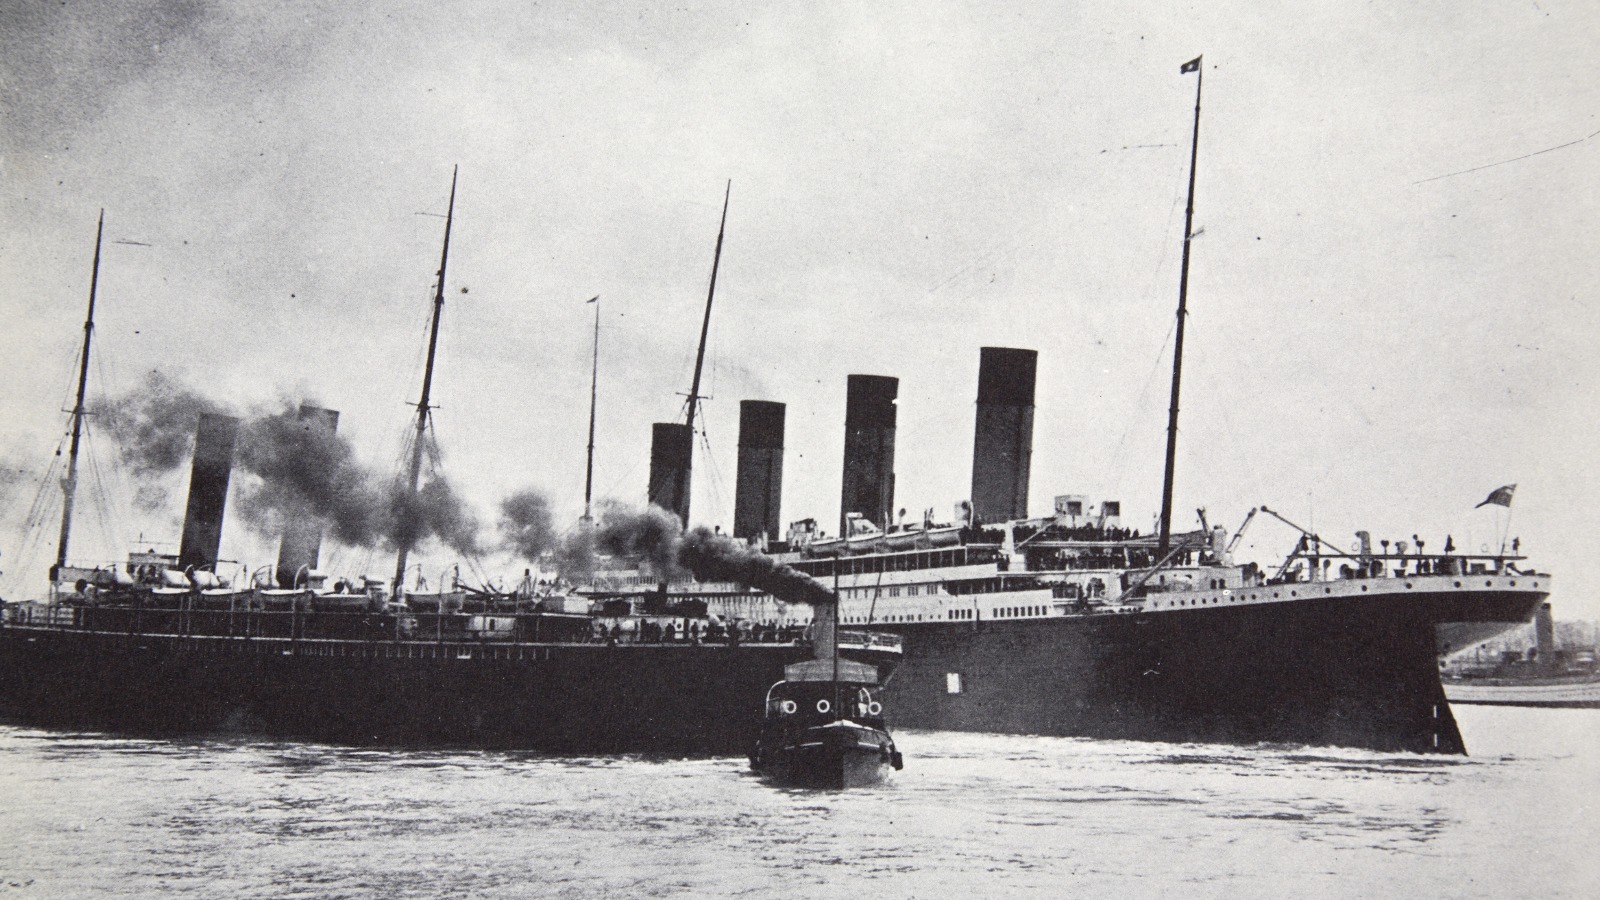 RMS Olympic: The Titanic Sister Ship That Narrowly Escaped Tragedy